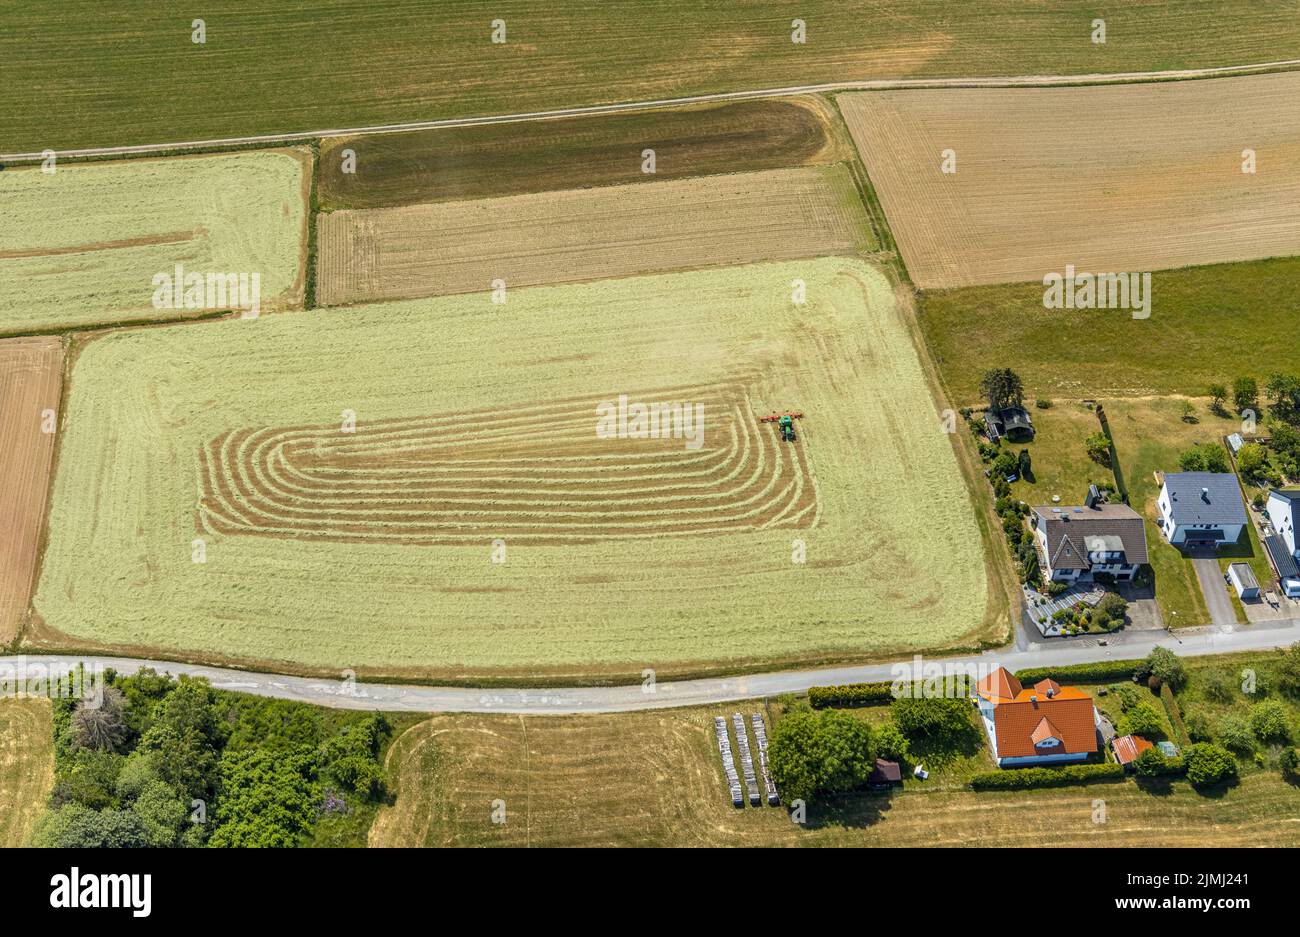 Aerial view, agricultural fields, haymaking, tractor mowing meadow, Liboriweg, Balve, Sauerland, North Rhine-Westphalia, Germany, DE, Europe, shapes a Stock Photo